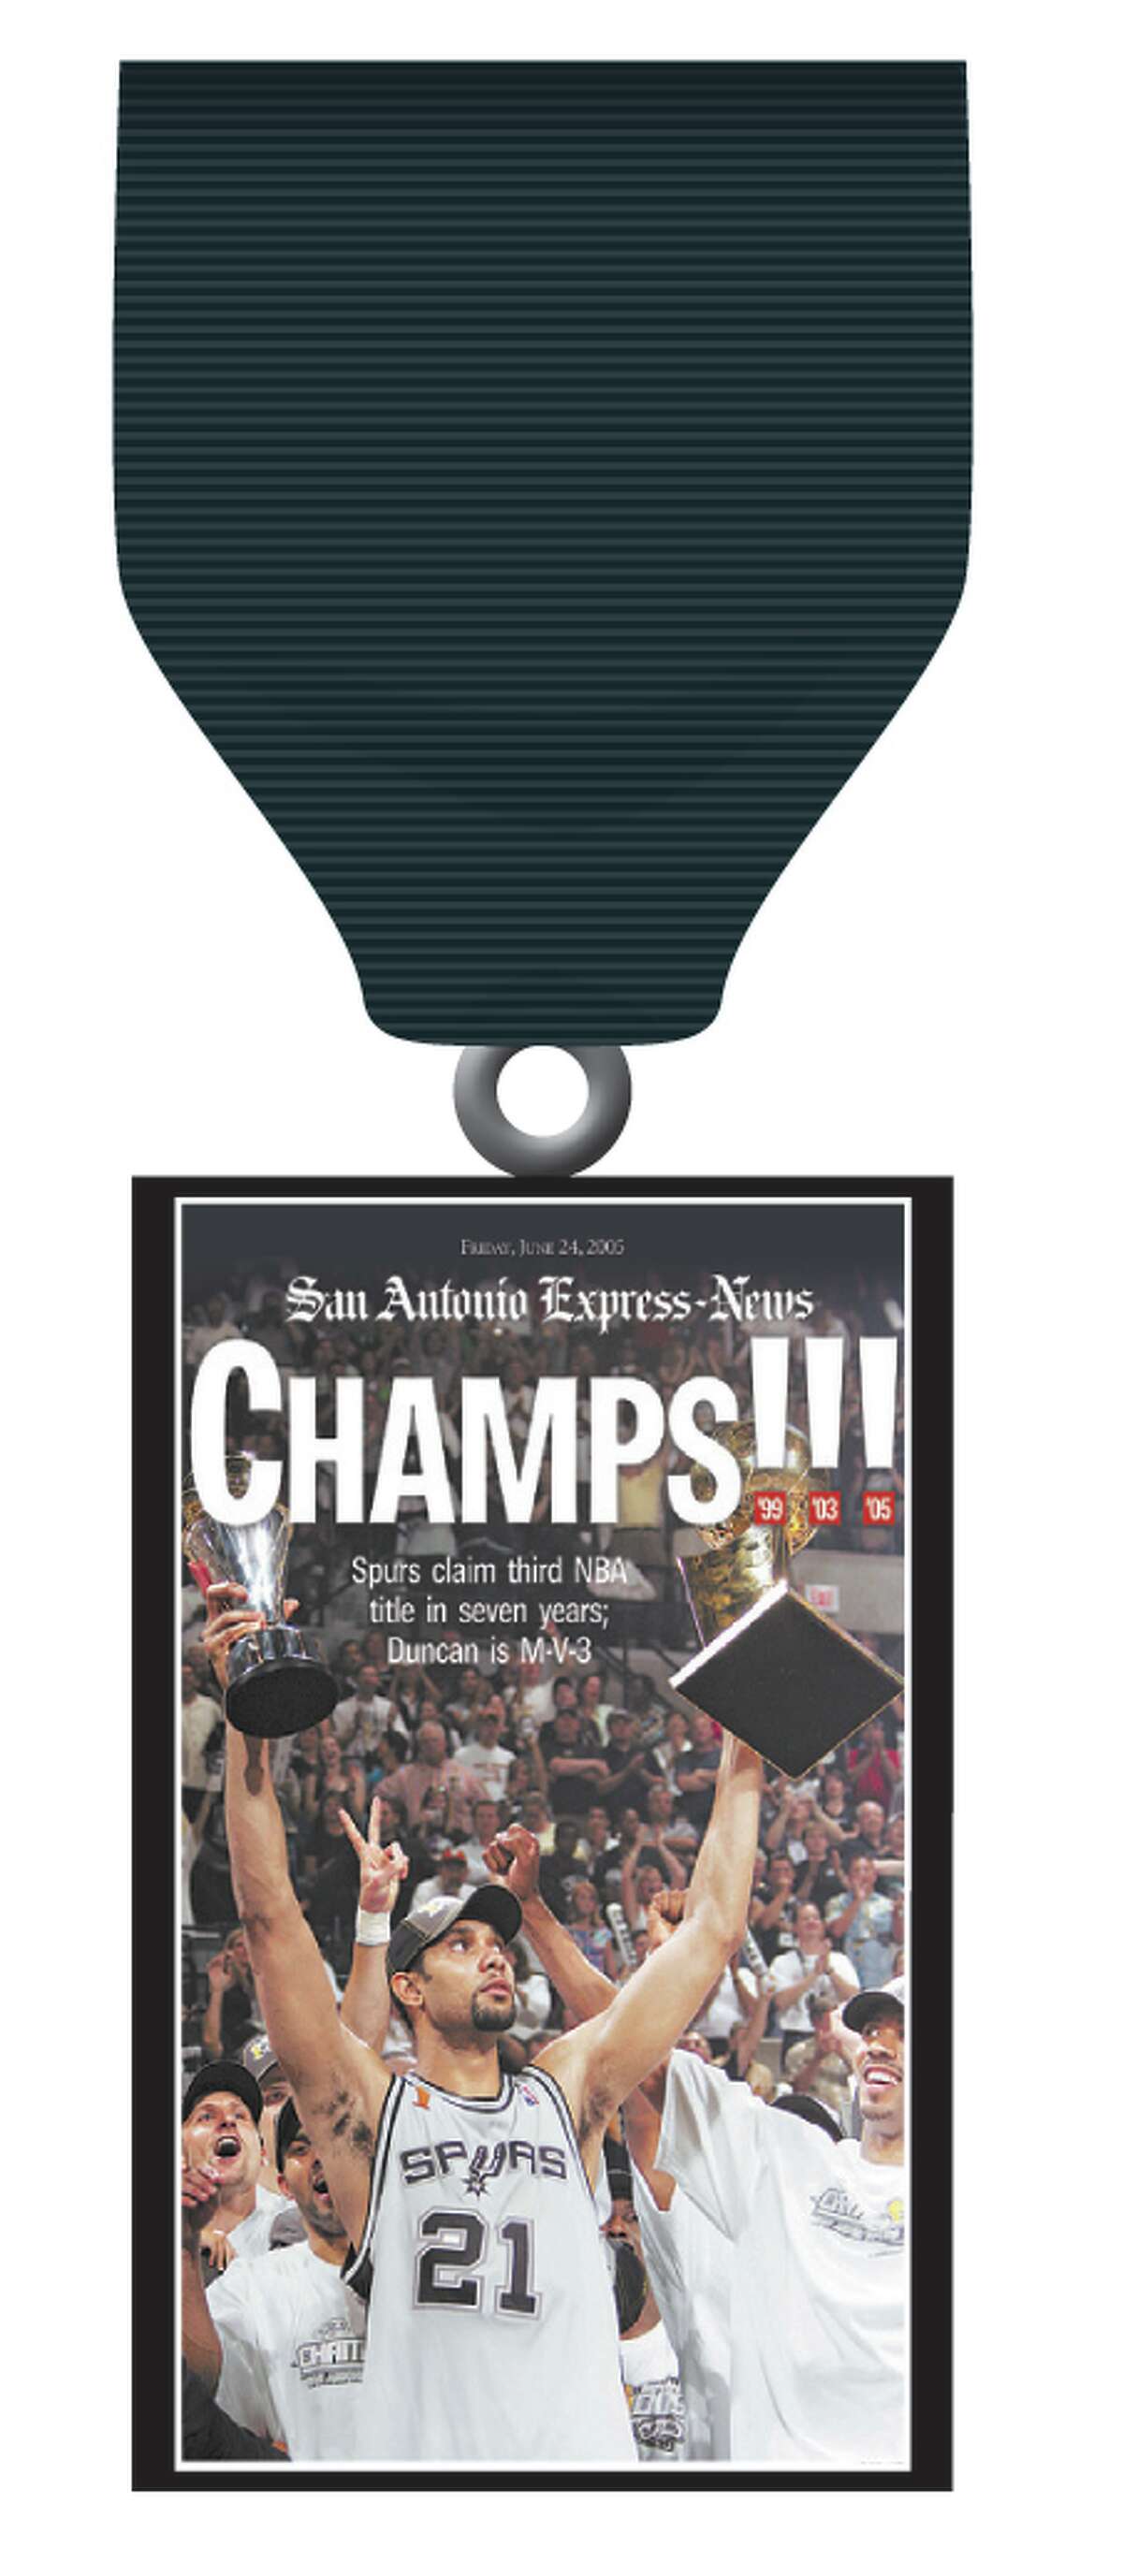 The San Antonio Express-News Commemorative Front Page Spurs Championship Medal for the 2005 Spurs championship.